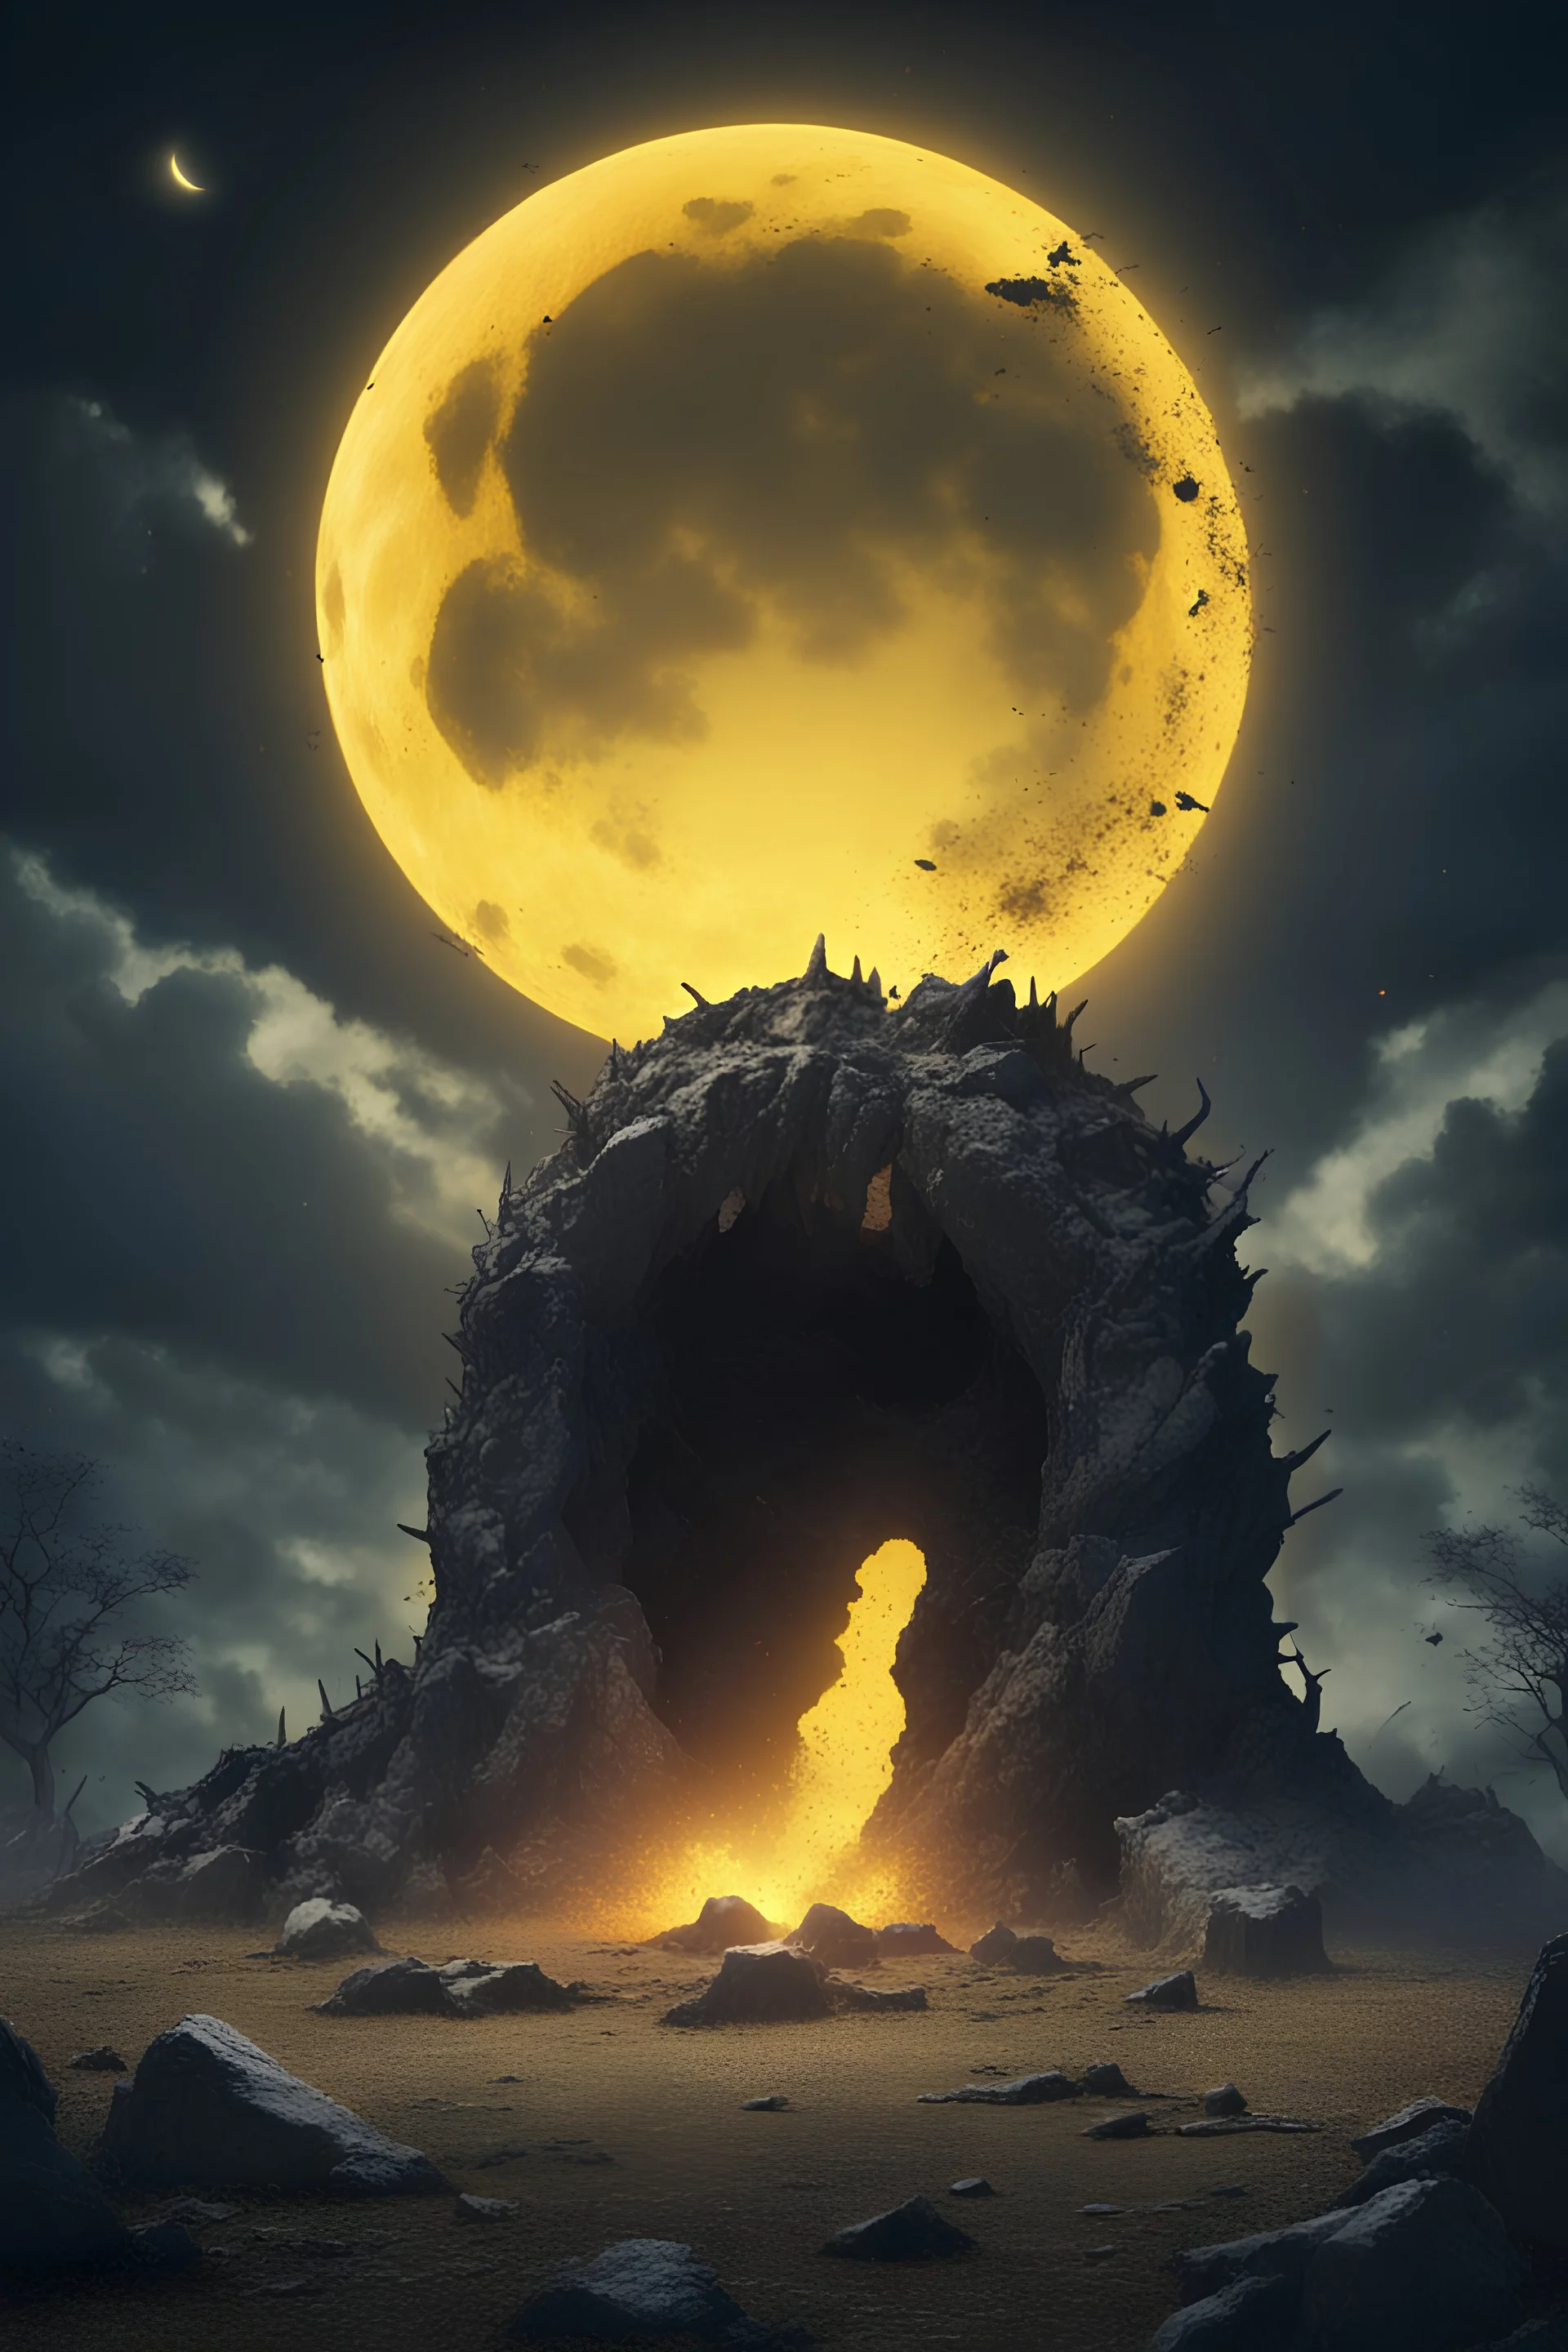 A ancient stone circle being destroyed by a eldritch monster, monster bursting out of the ground,Yellow moon shining ominously in the sky,realistic lighting, outstanding details,4k quality